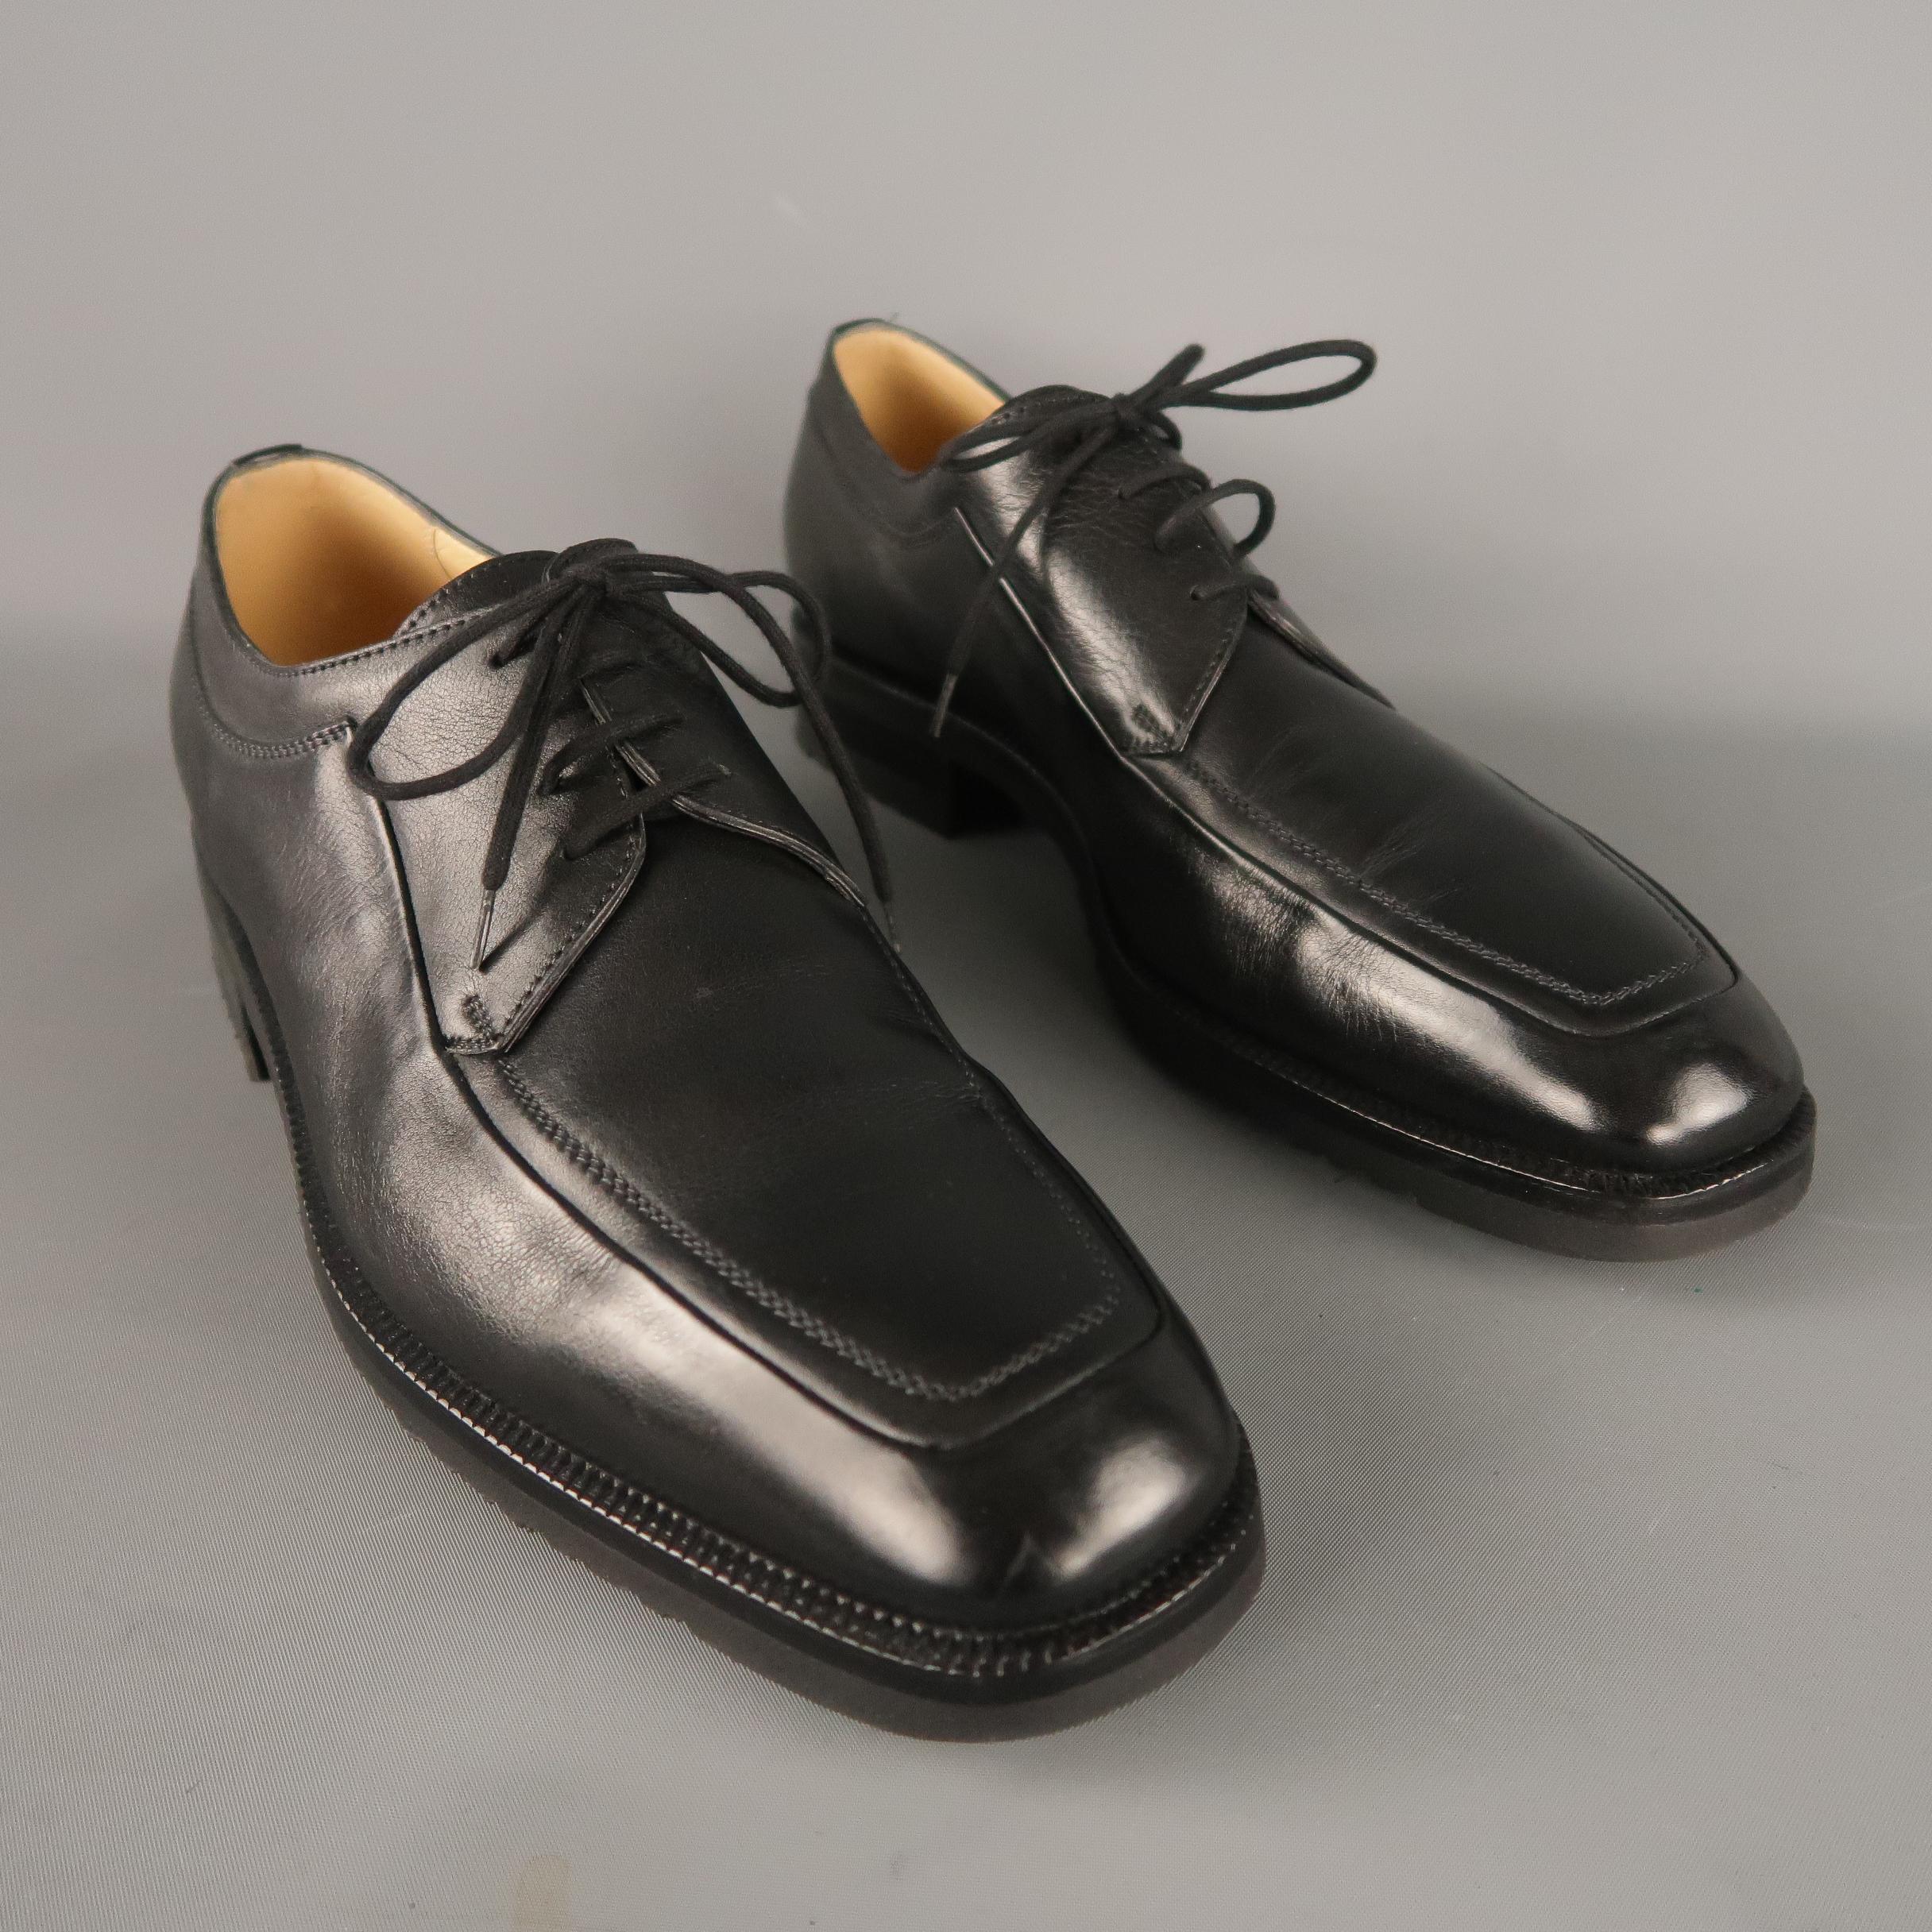 GRAVATI for ARTHUR BEREN Lace Up Shoes comes in a black tone in a solid leather material, with a pointed toe. With Box. Made in Italy.
 
Excellent Good Pre-Owned Condition.
Marked: 9.5
 
Outsole: 12 x 4 in.